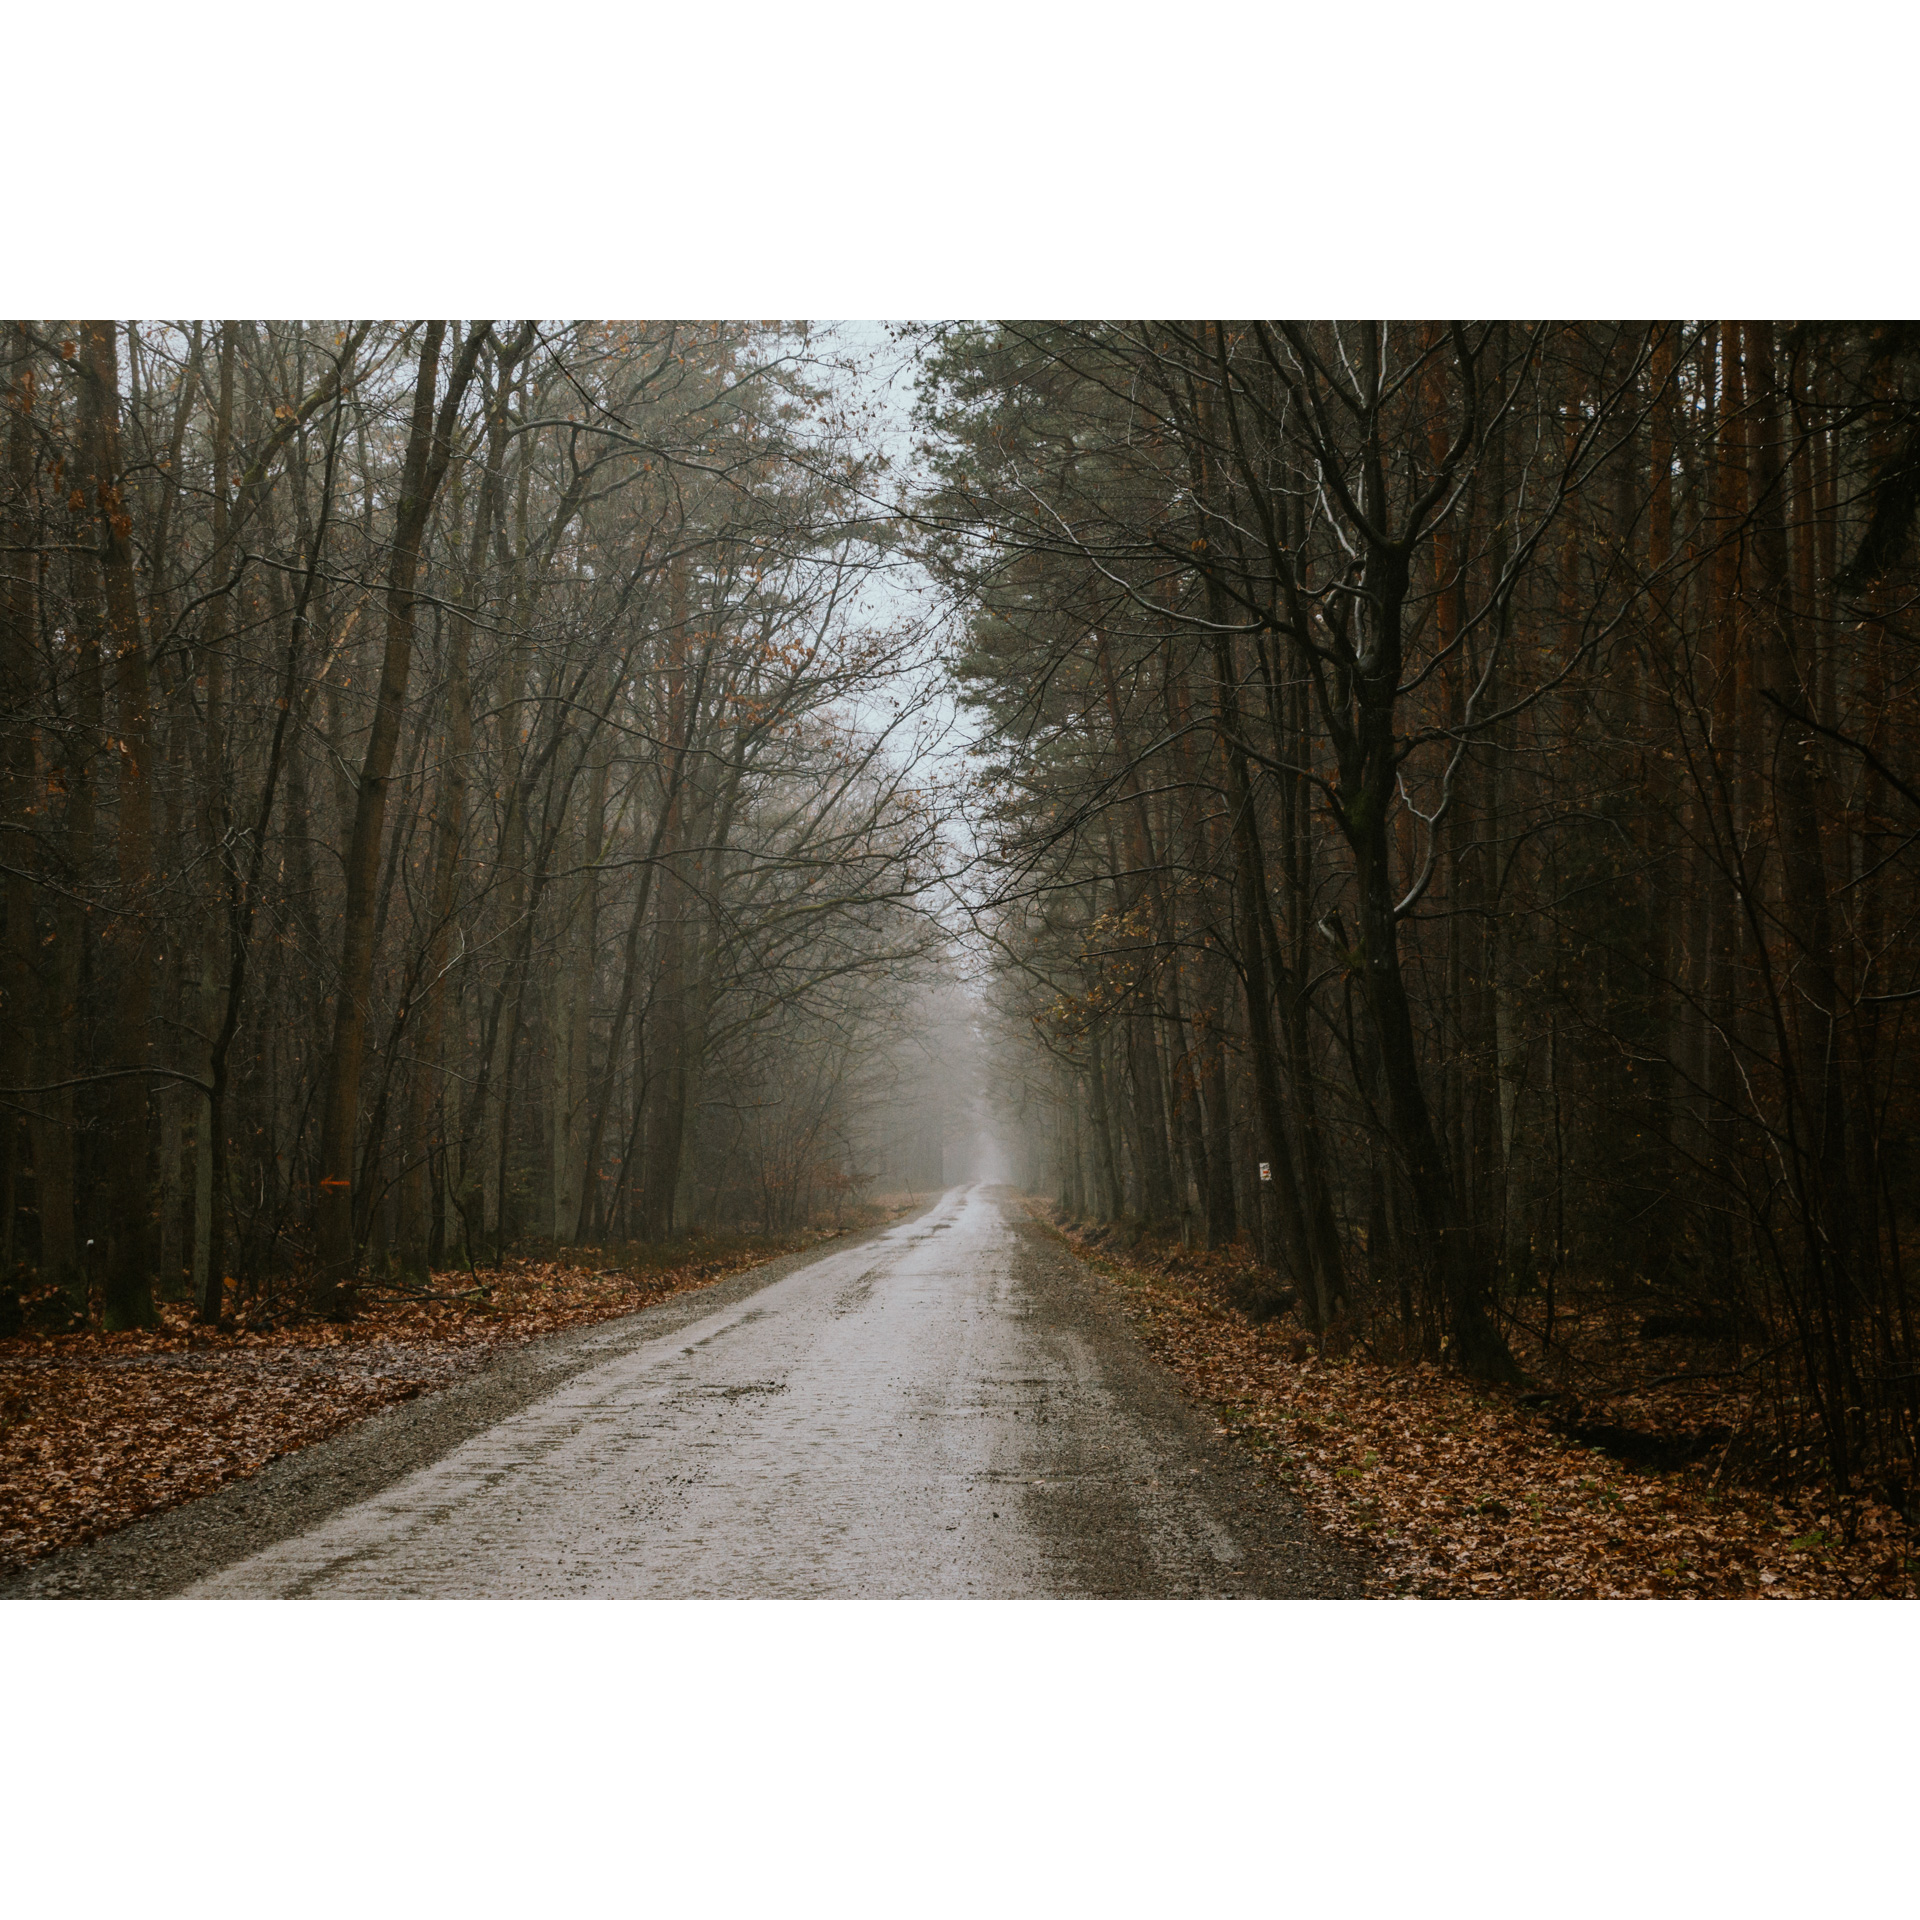 A paved road leading through a dark forest with fog floating in the distance